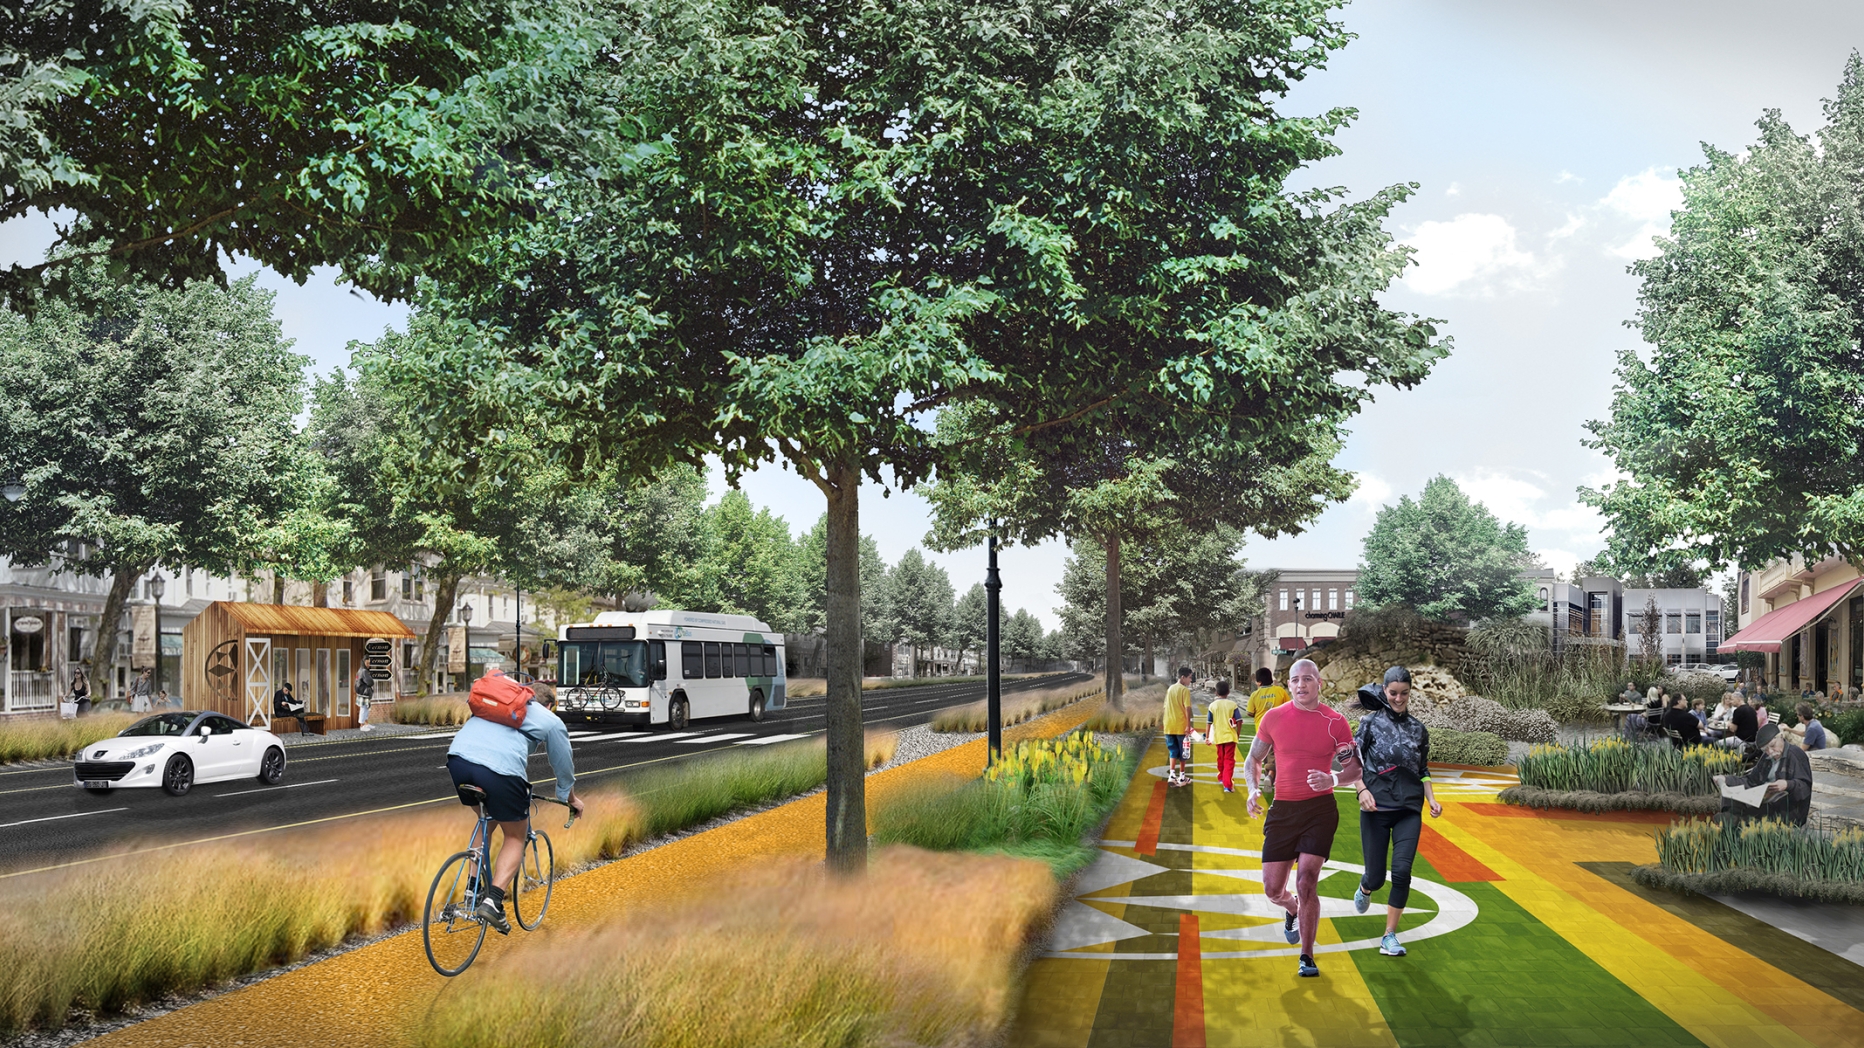 Rendering of an urban byway with paths and plantings